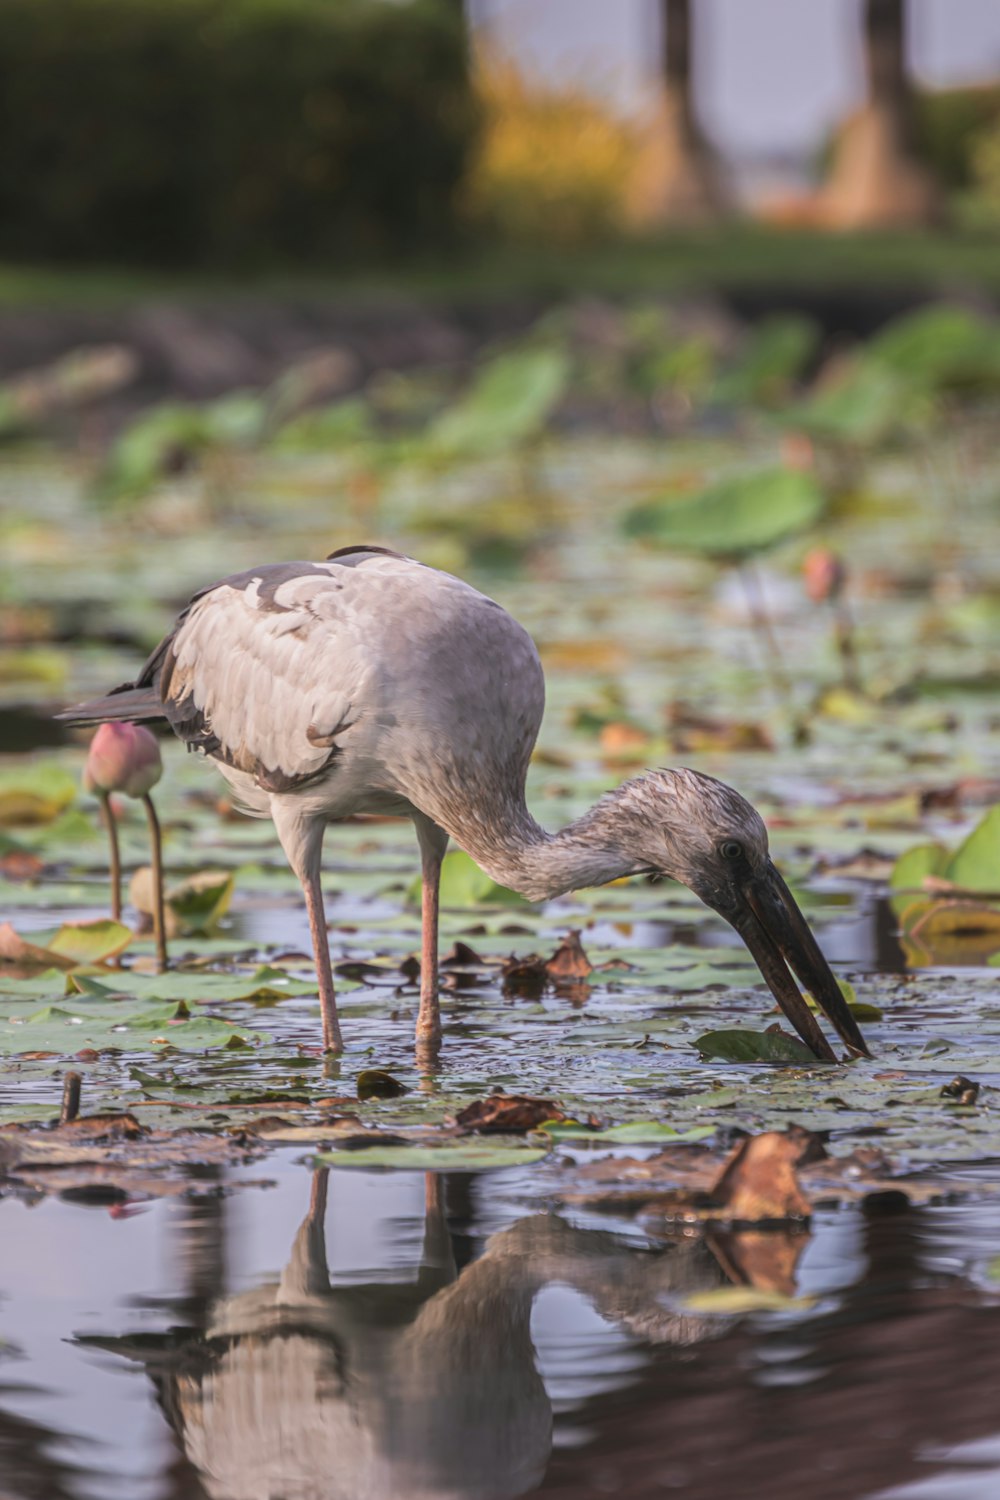 a bird is standing in the water and eating